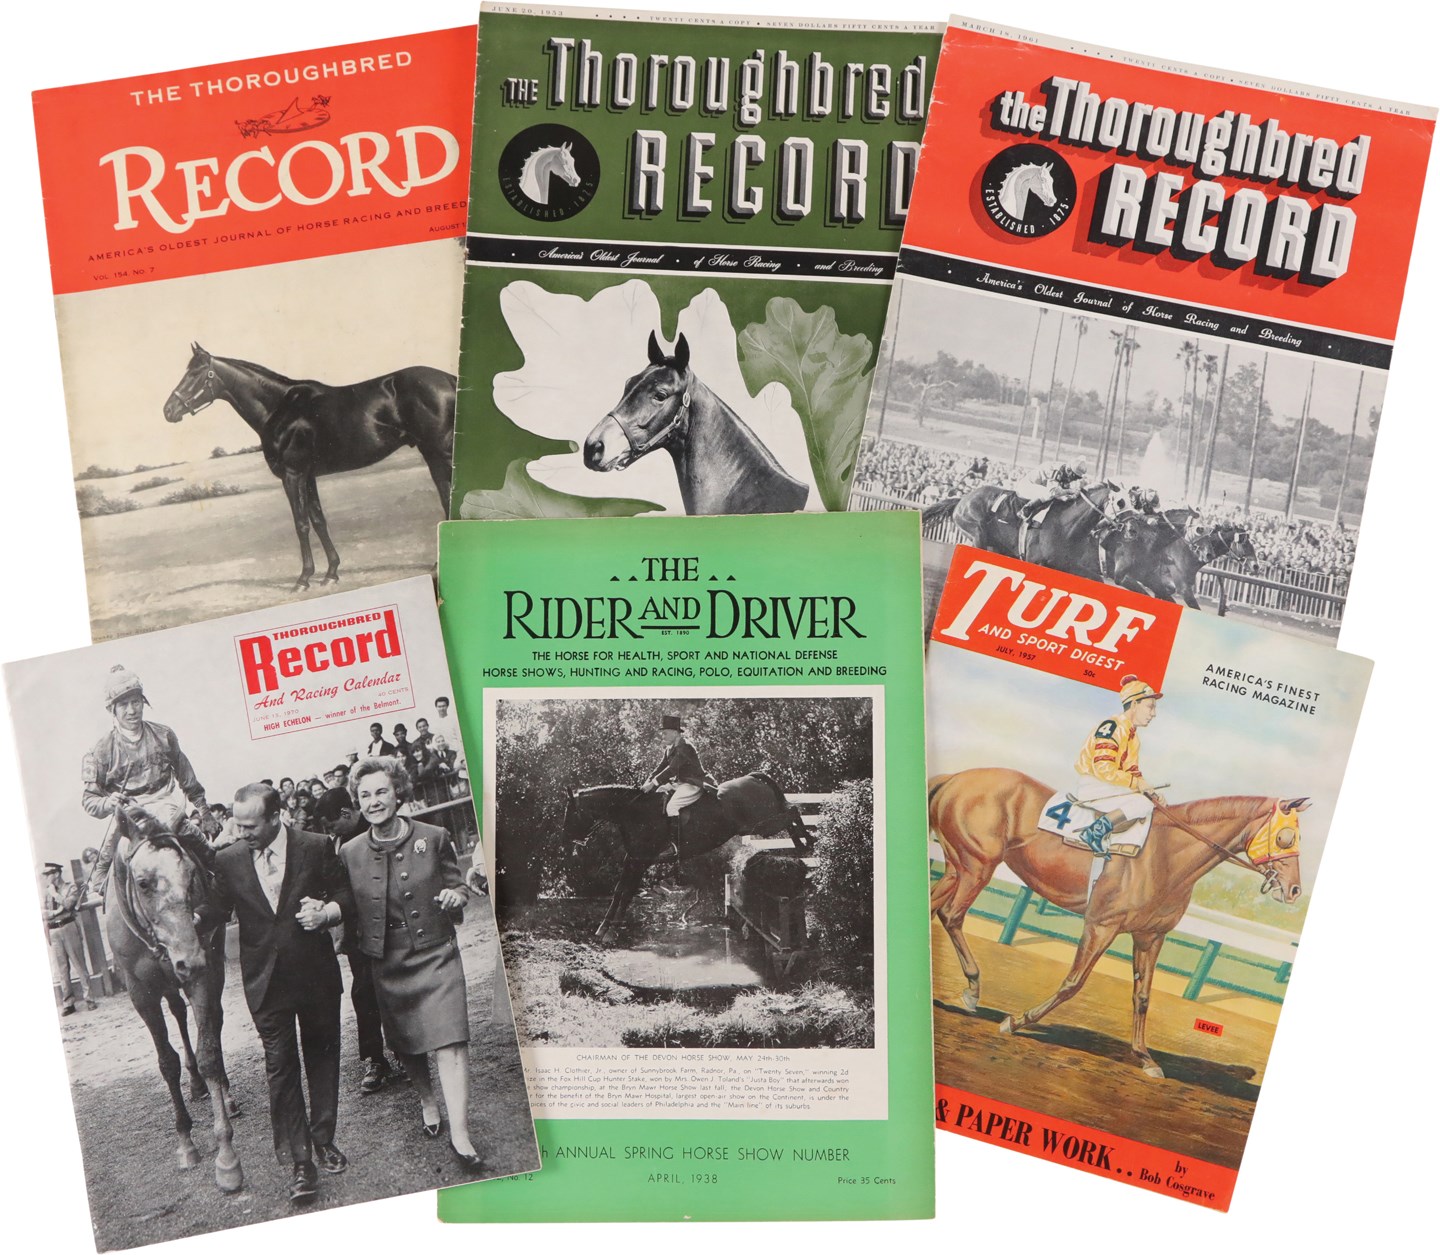 - Magazines, Journals, Books, Etc., Featuring Articles and Photos of Important Racehorses, Races, Racetracks, and Jockeys of a Bygone Era (21)